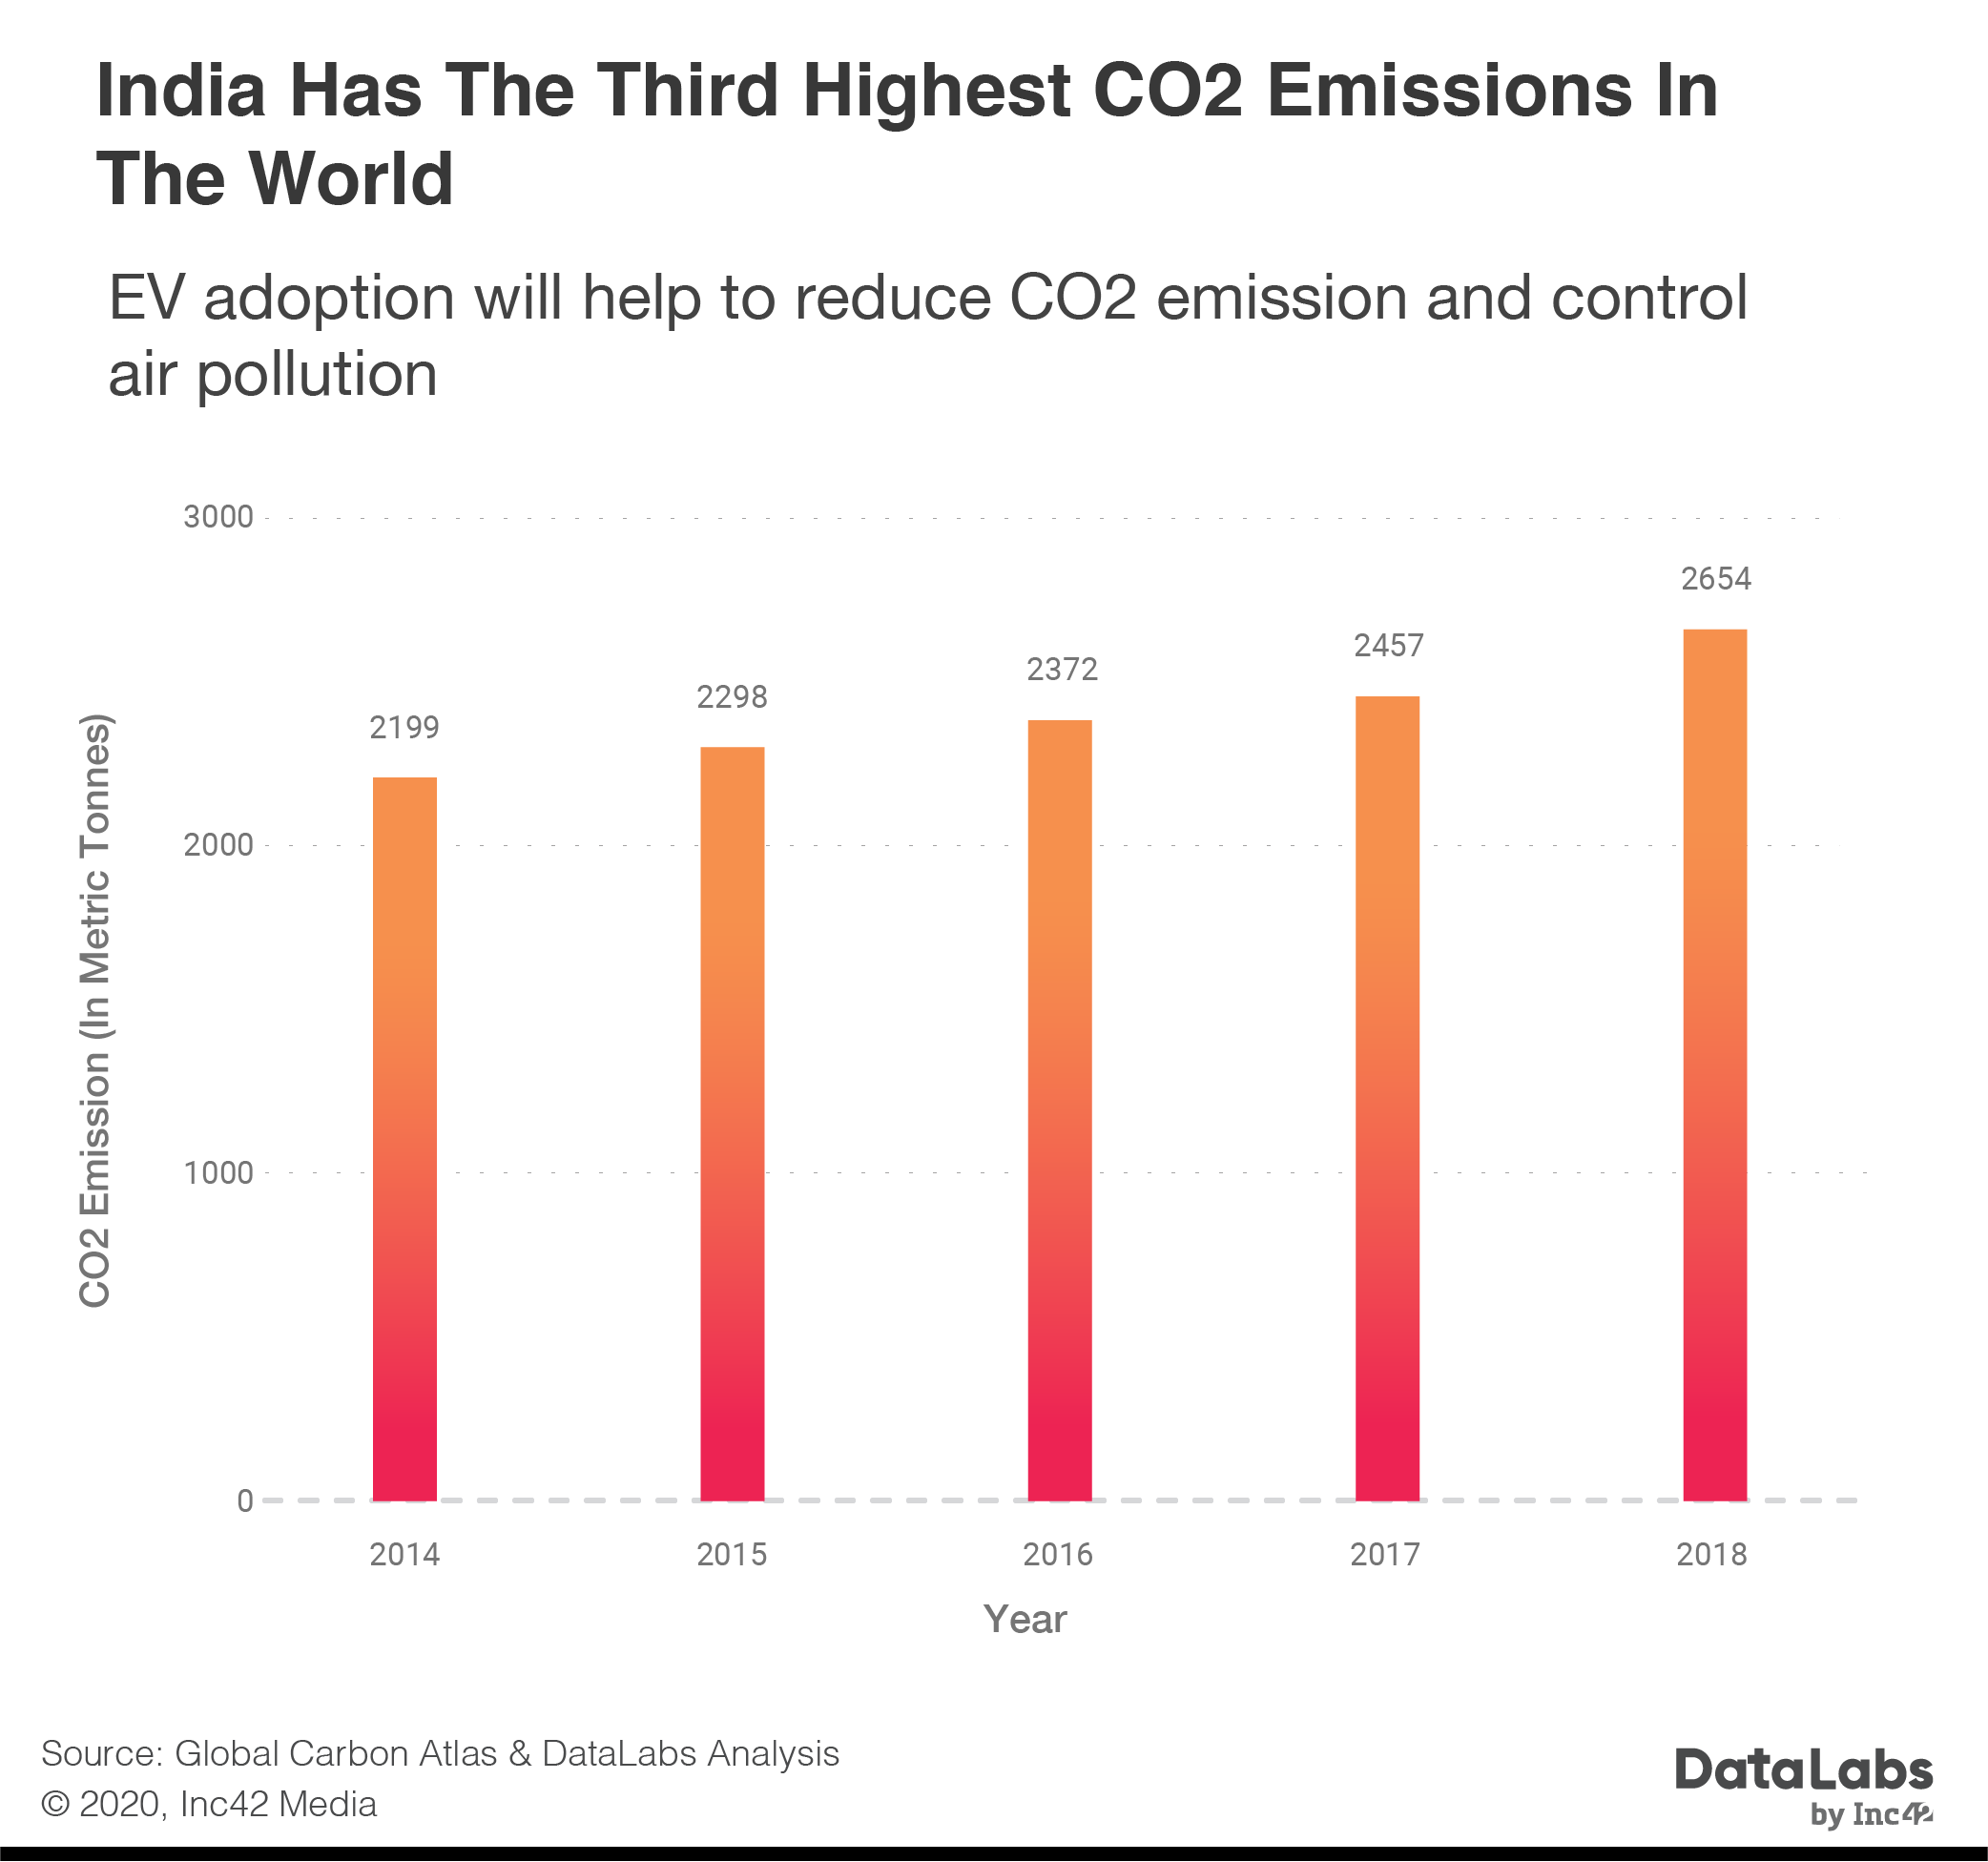 Co2 emission in India